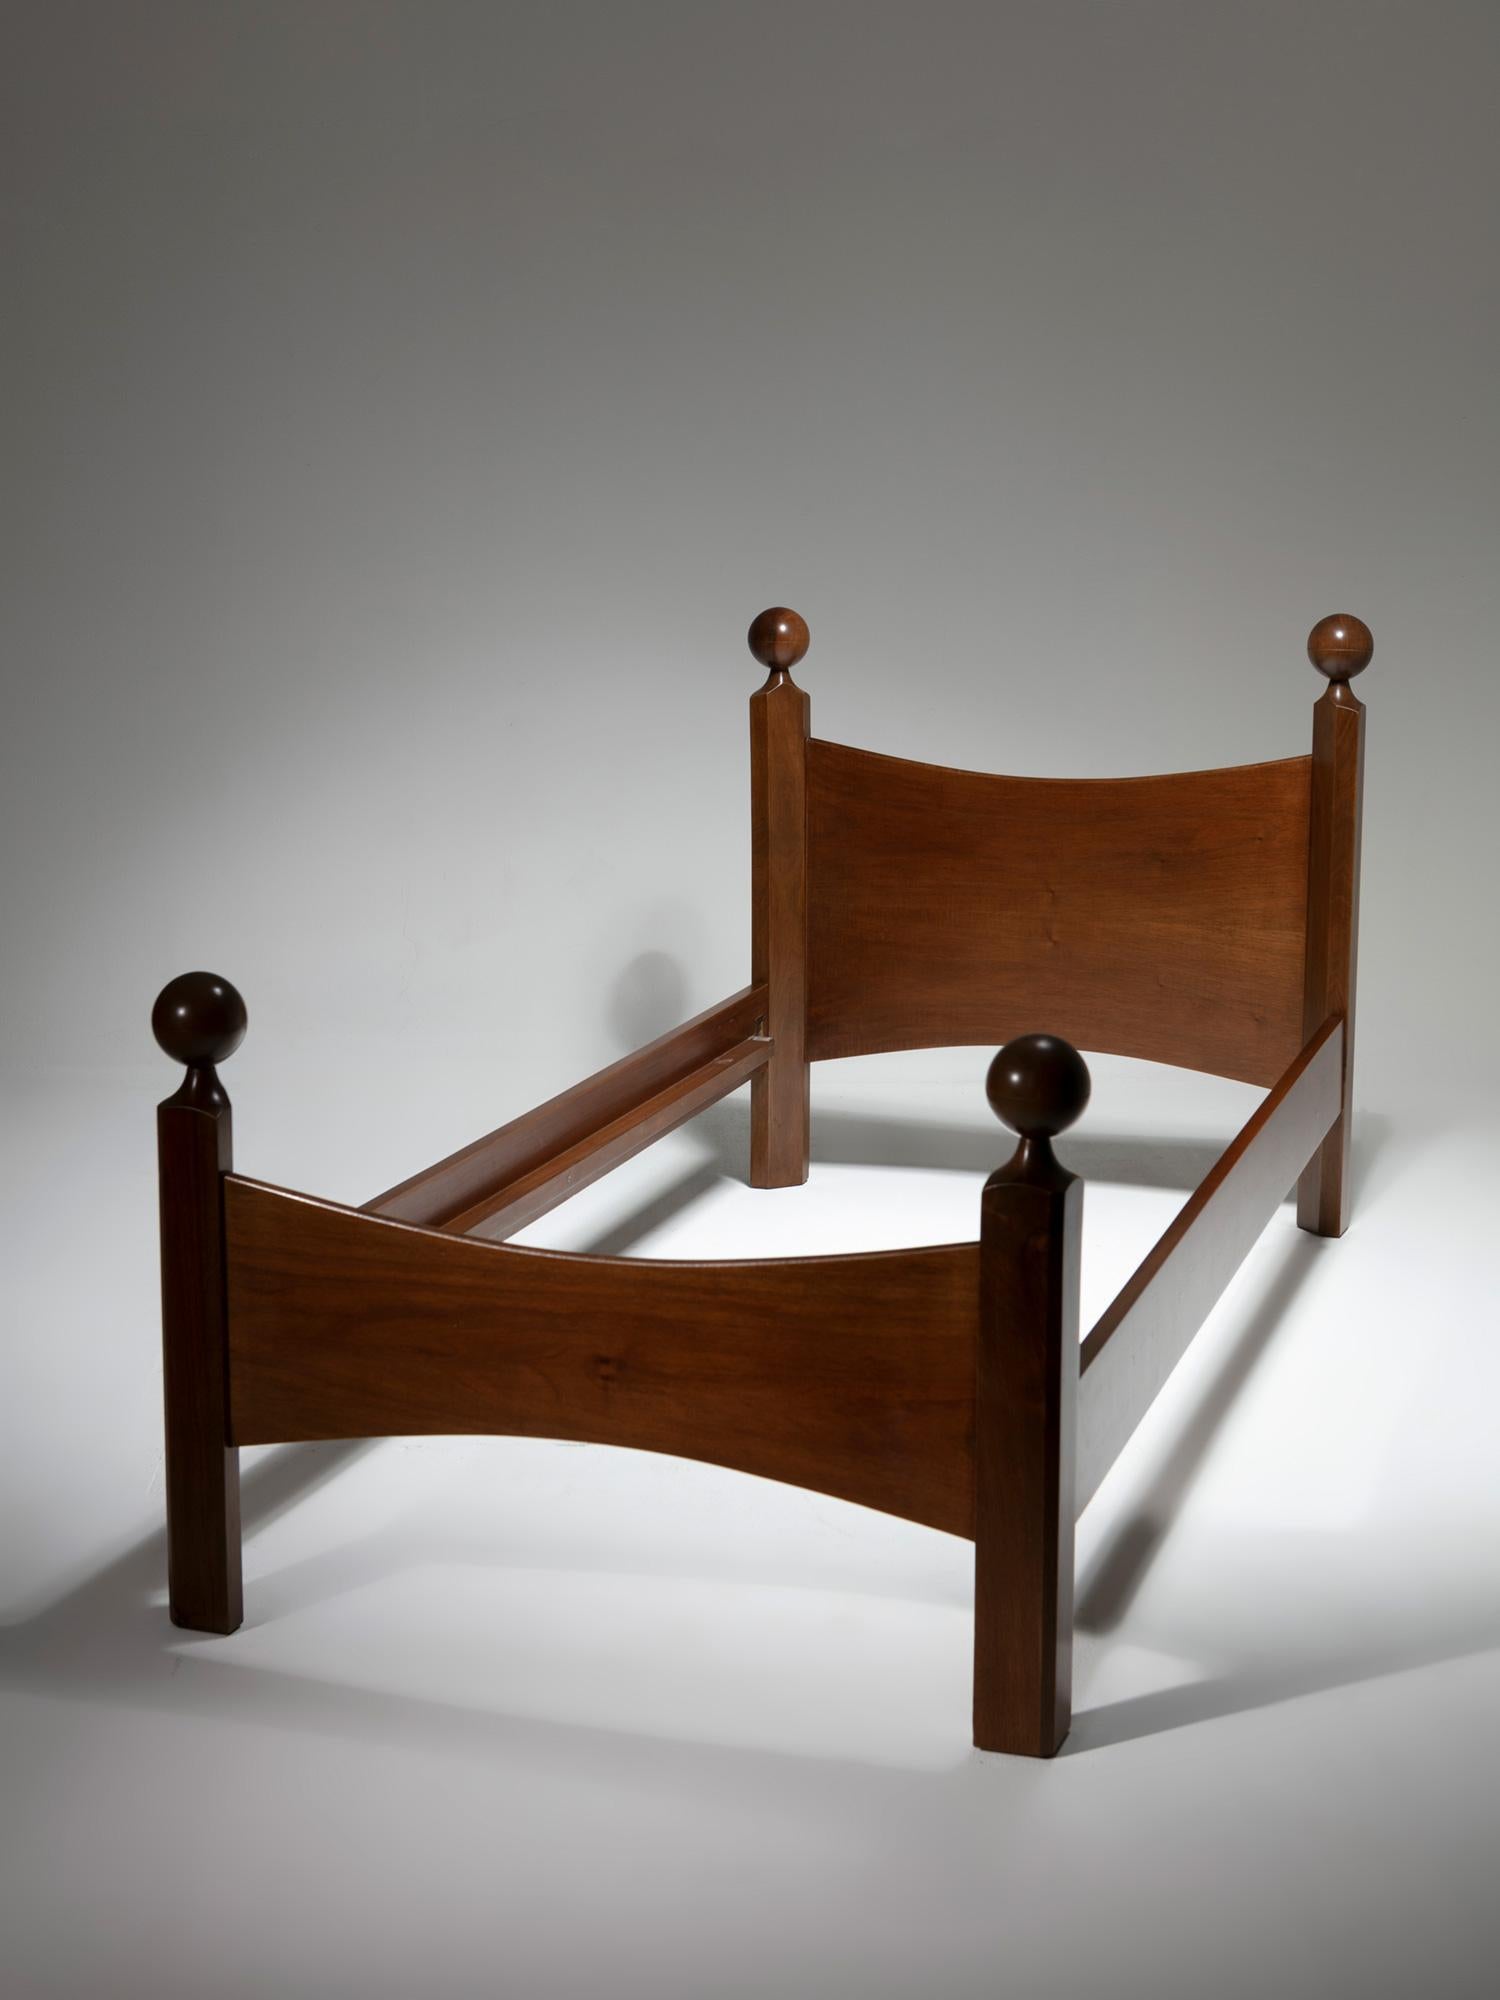 Set of two Chesa Laria single beds frames by Luigi Caccia Dominioni for Azucena.
Solid walnut frame with sculptural ends.